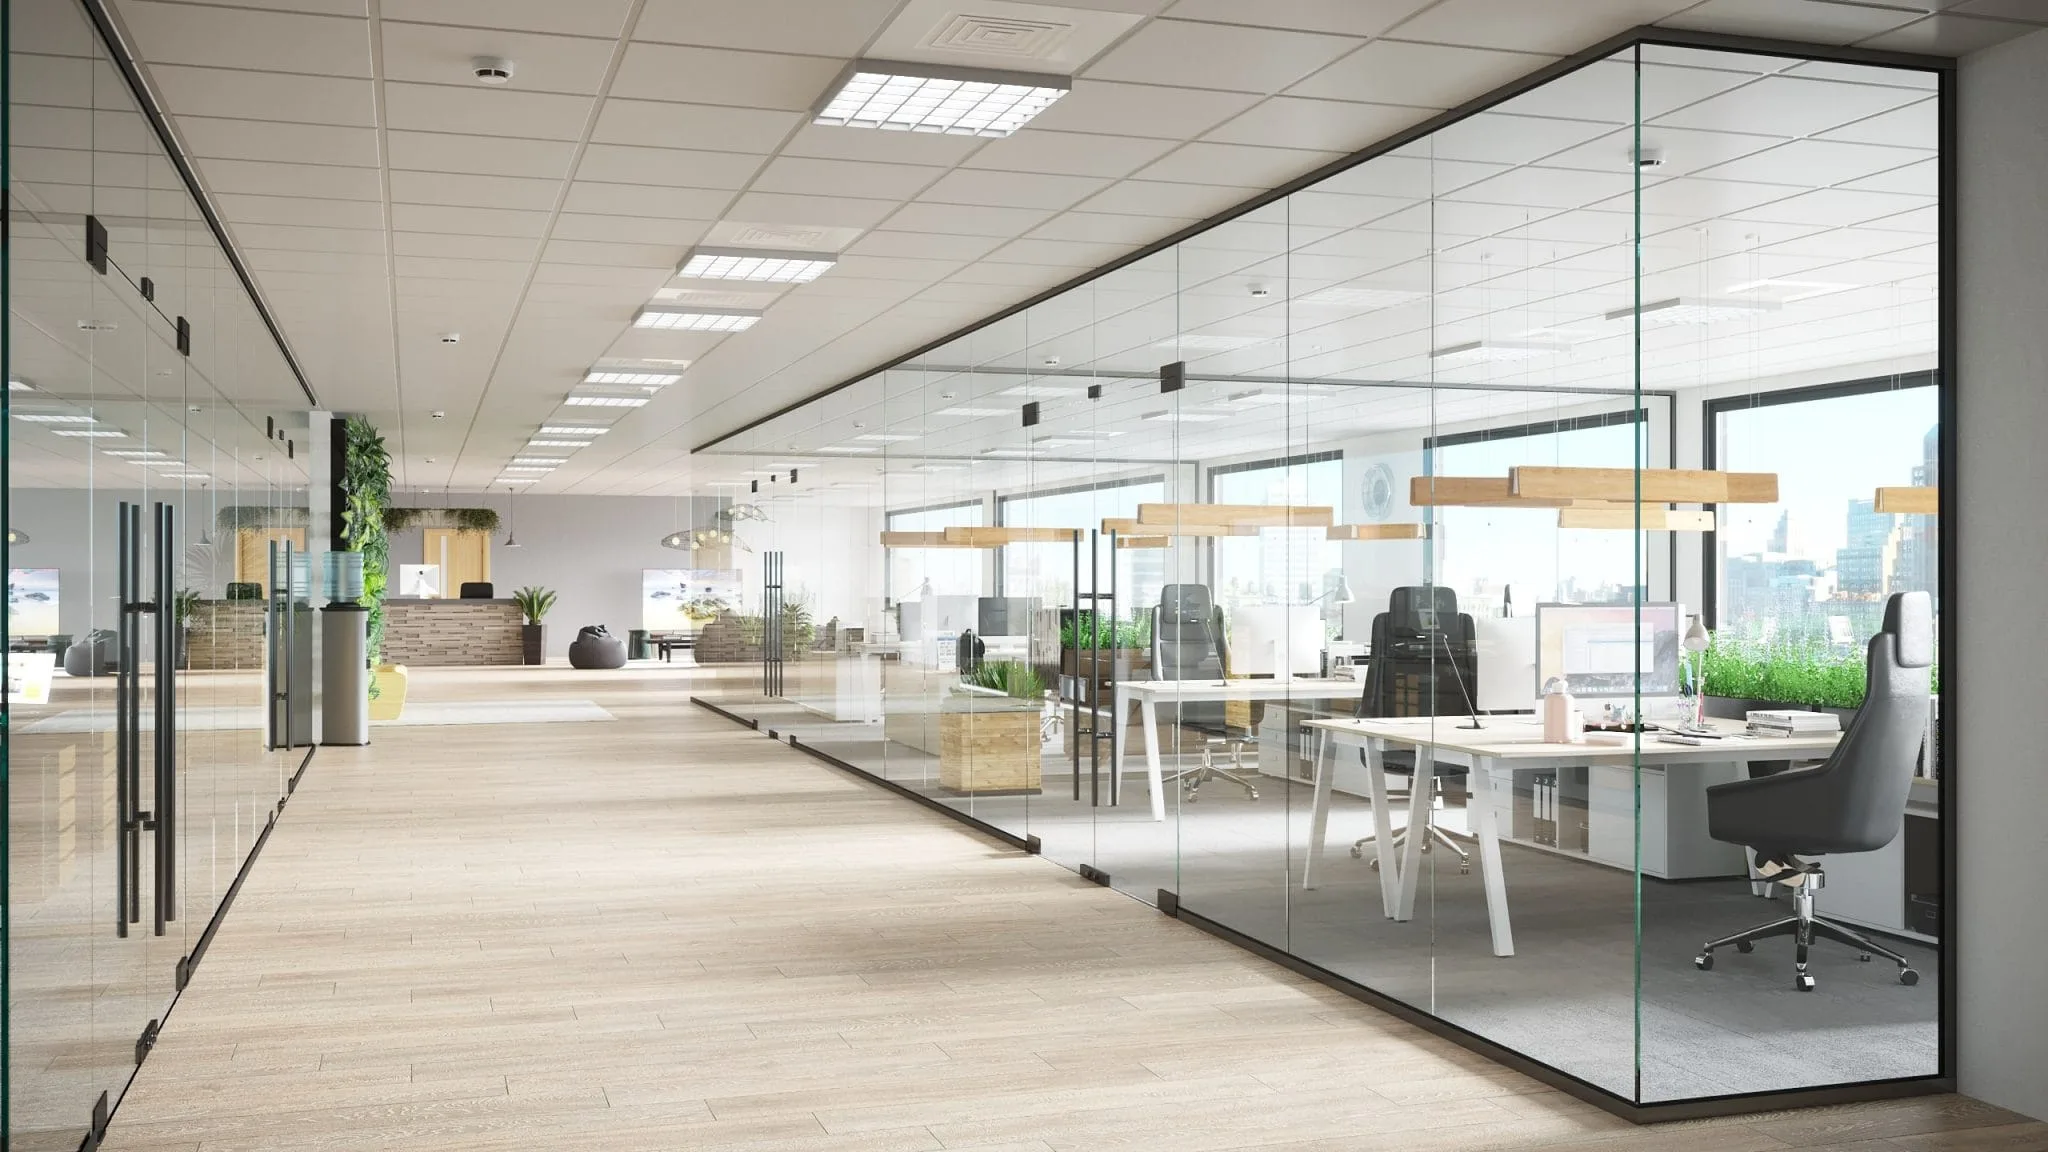 OFFICES INTERIOR DESIGN & FIT-OUT – WORKSPACE PLANNING BY DESIGNSPACE IN RIYADH JEDDAH SAUDI ARABIA Frameless glass partitions with open office area